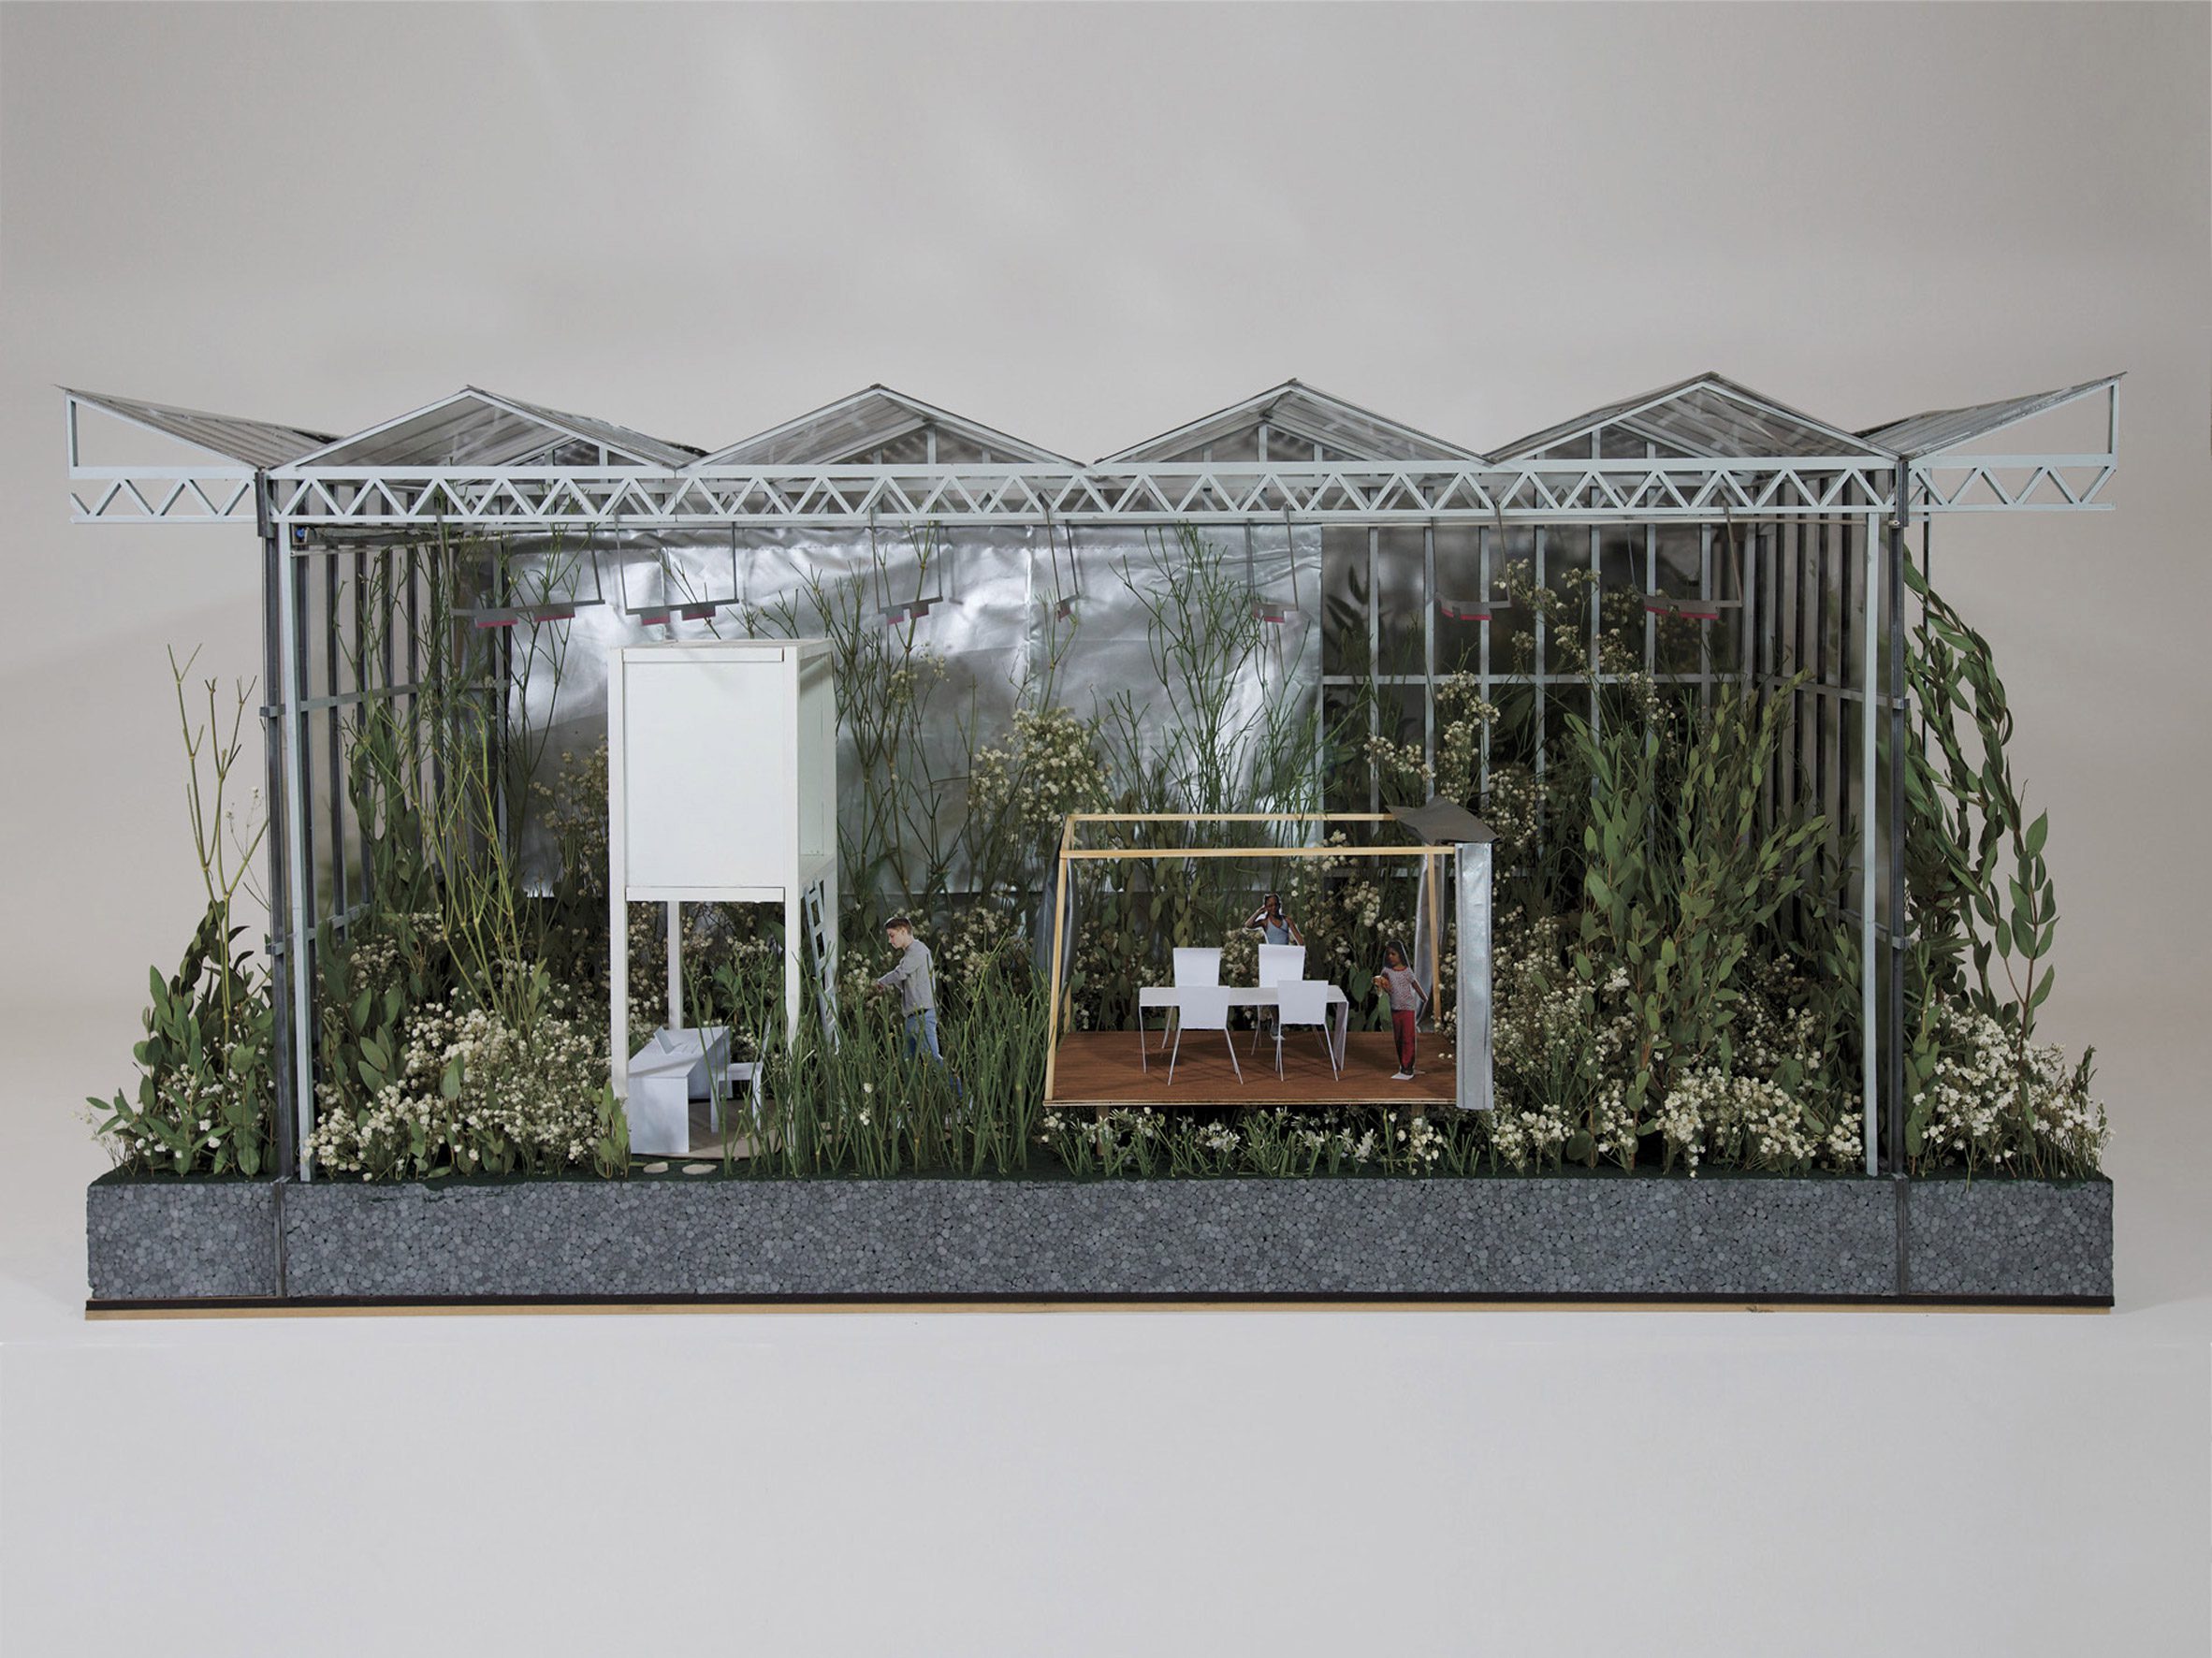 photo of a greenhouse model